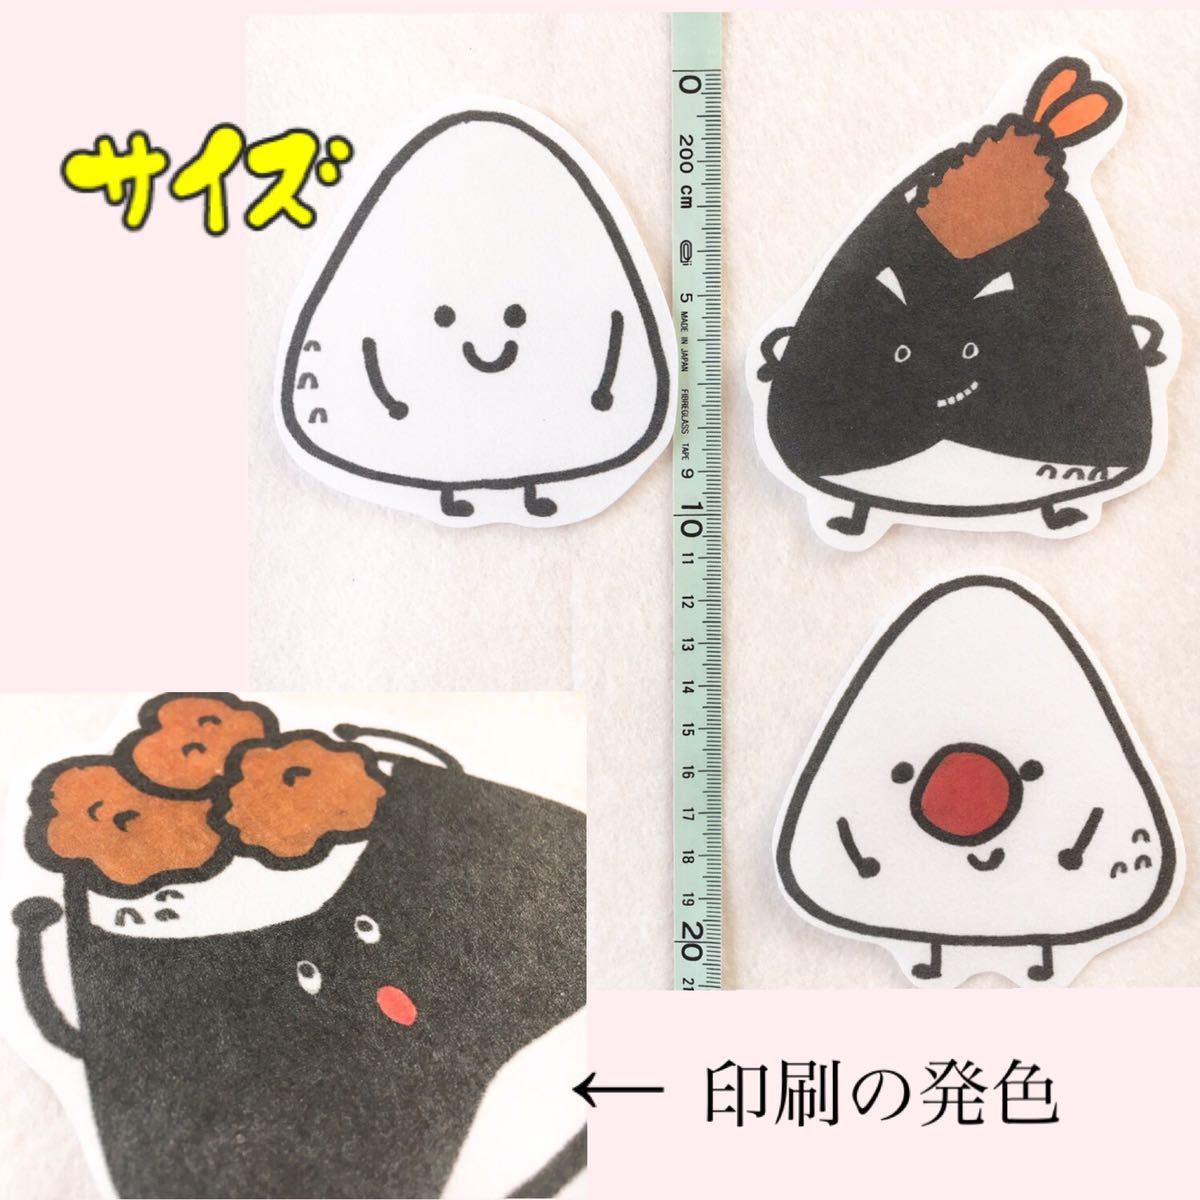 ..... rice ball onigiri kun panel theater *. pair /.. present / daytime meal / meal ./ child care teaching material 